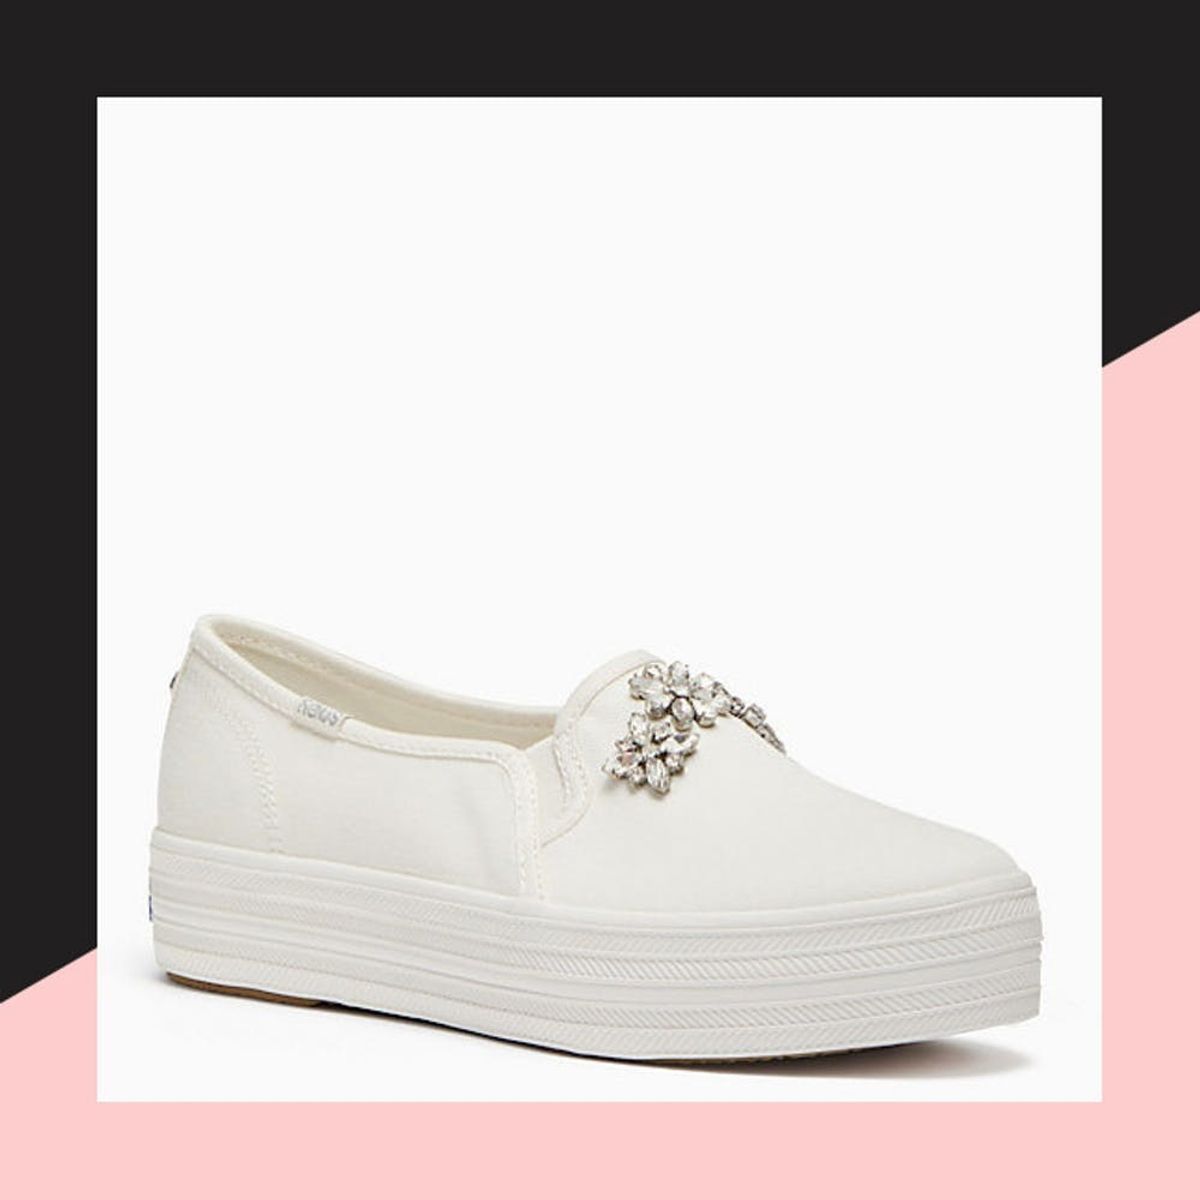 Kate Spade New York x Keds Just Debuted the Cutest (and Comfiest!) Wedding Shoes Of All Time